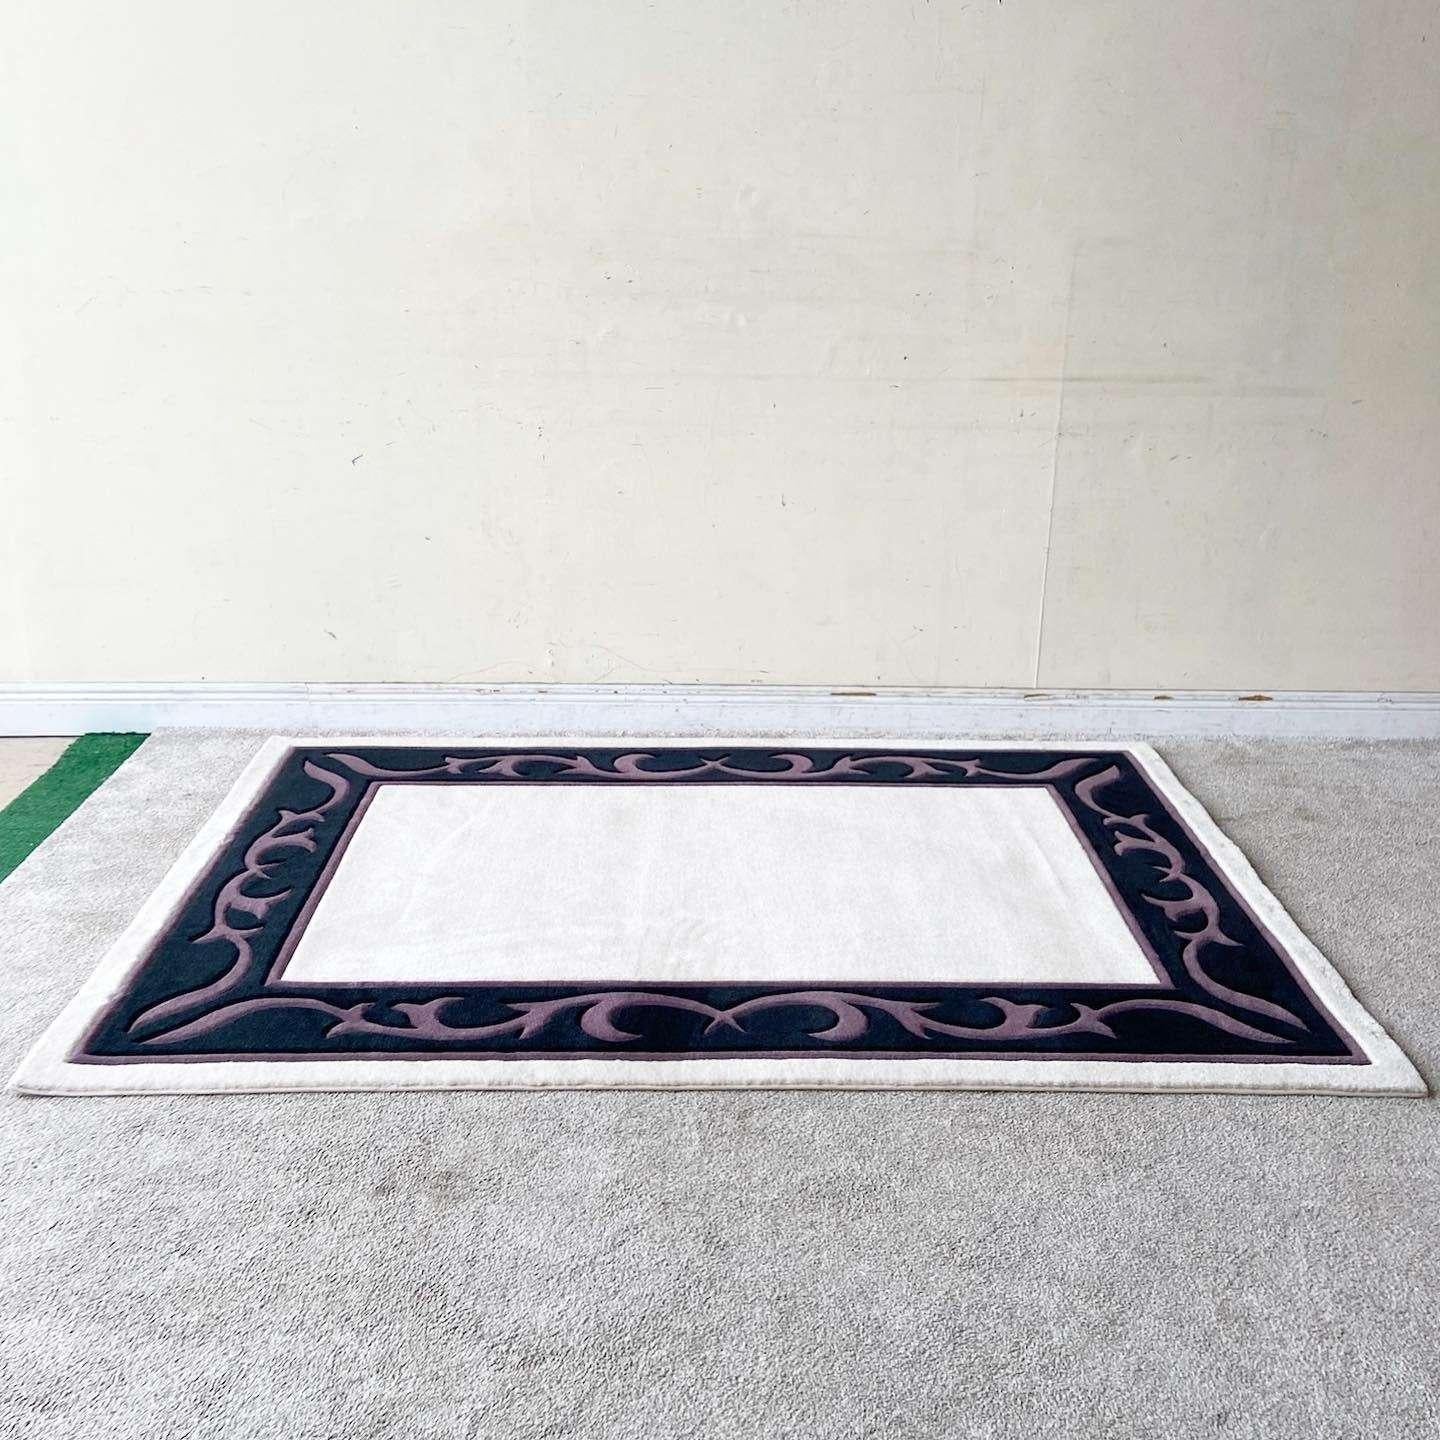 Exceptional vintage postmodern rectangular area rug. Features a beige interior border by a black section with purple vining throughout the edge.

Rug 11
